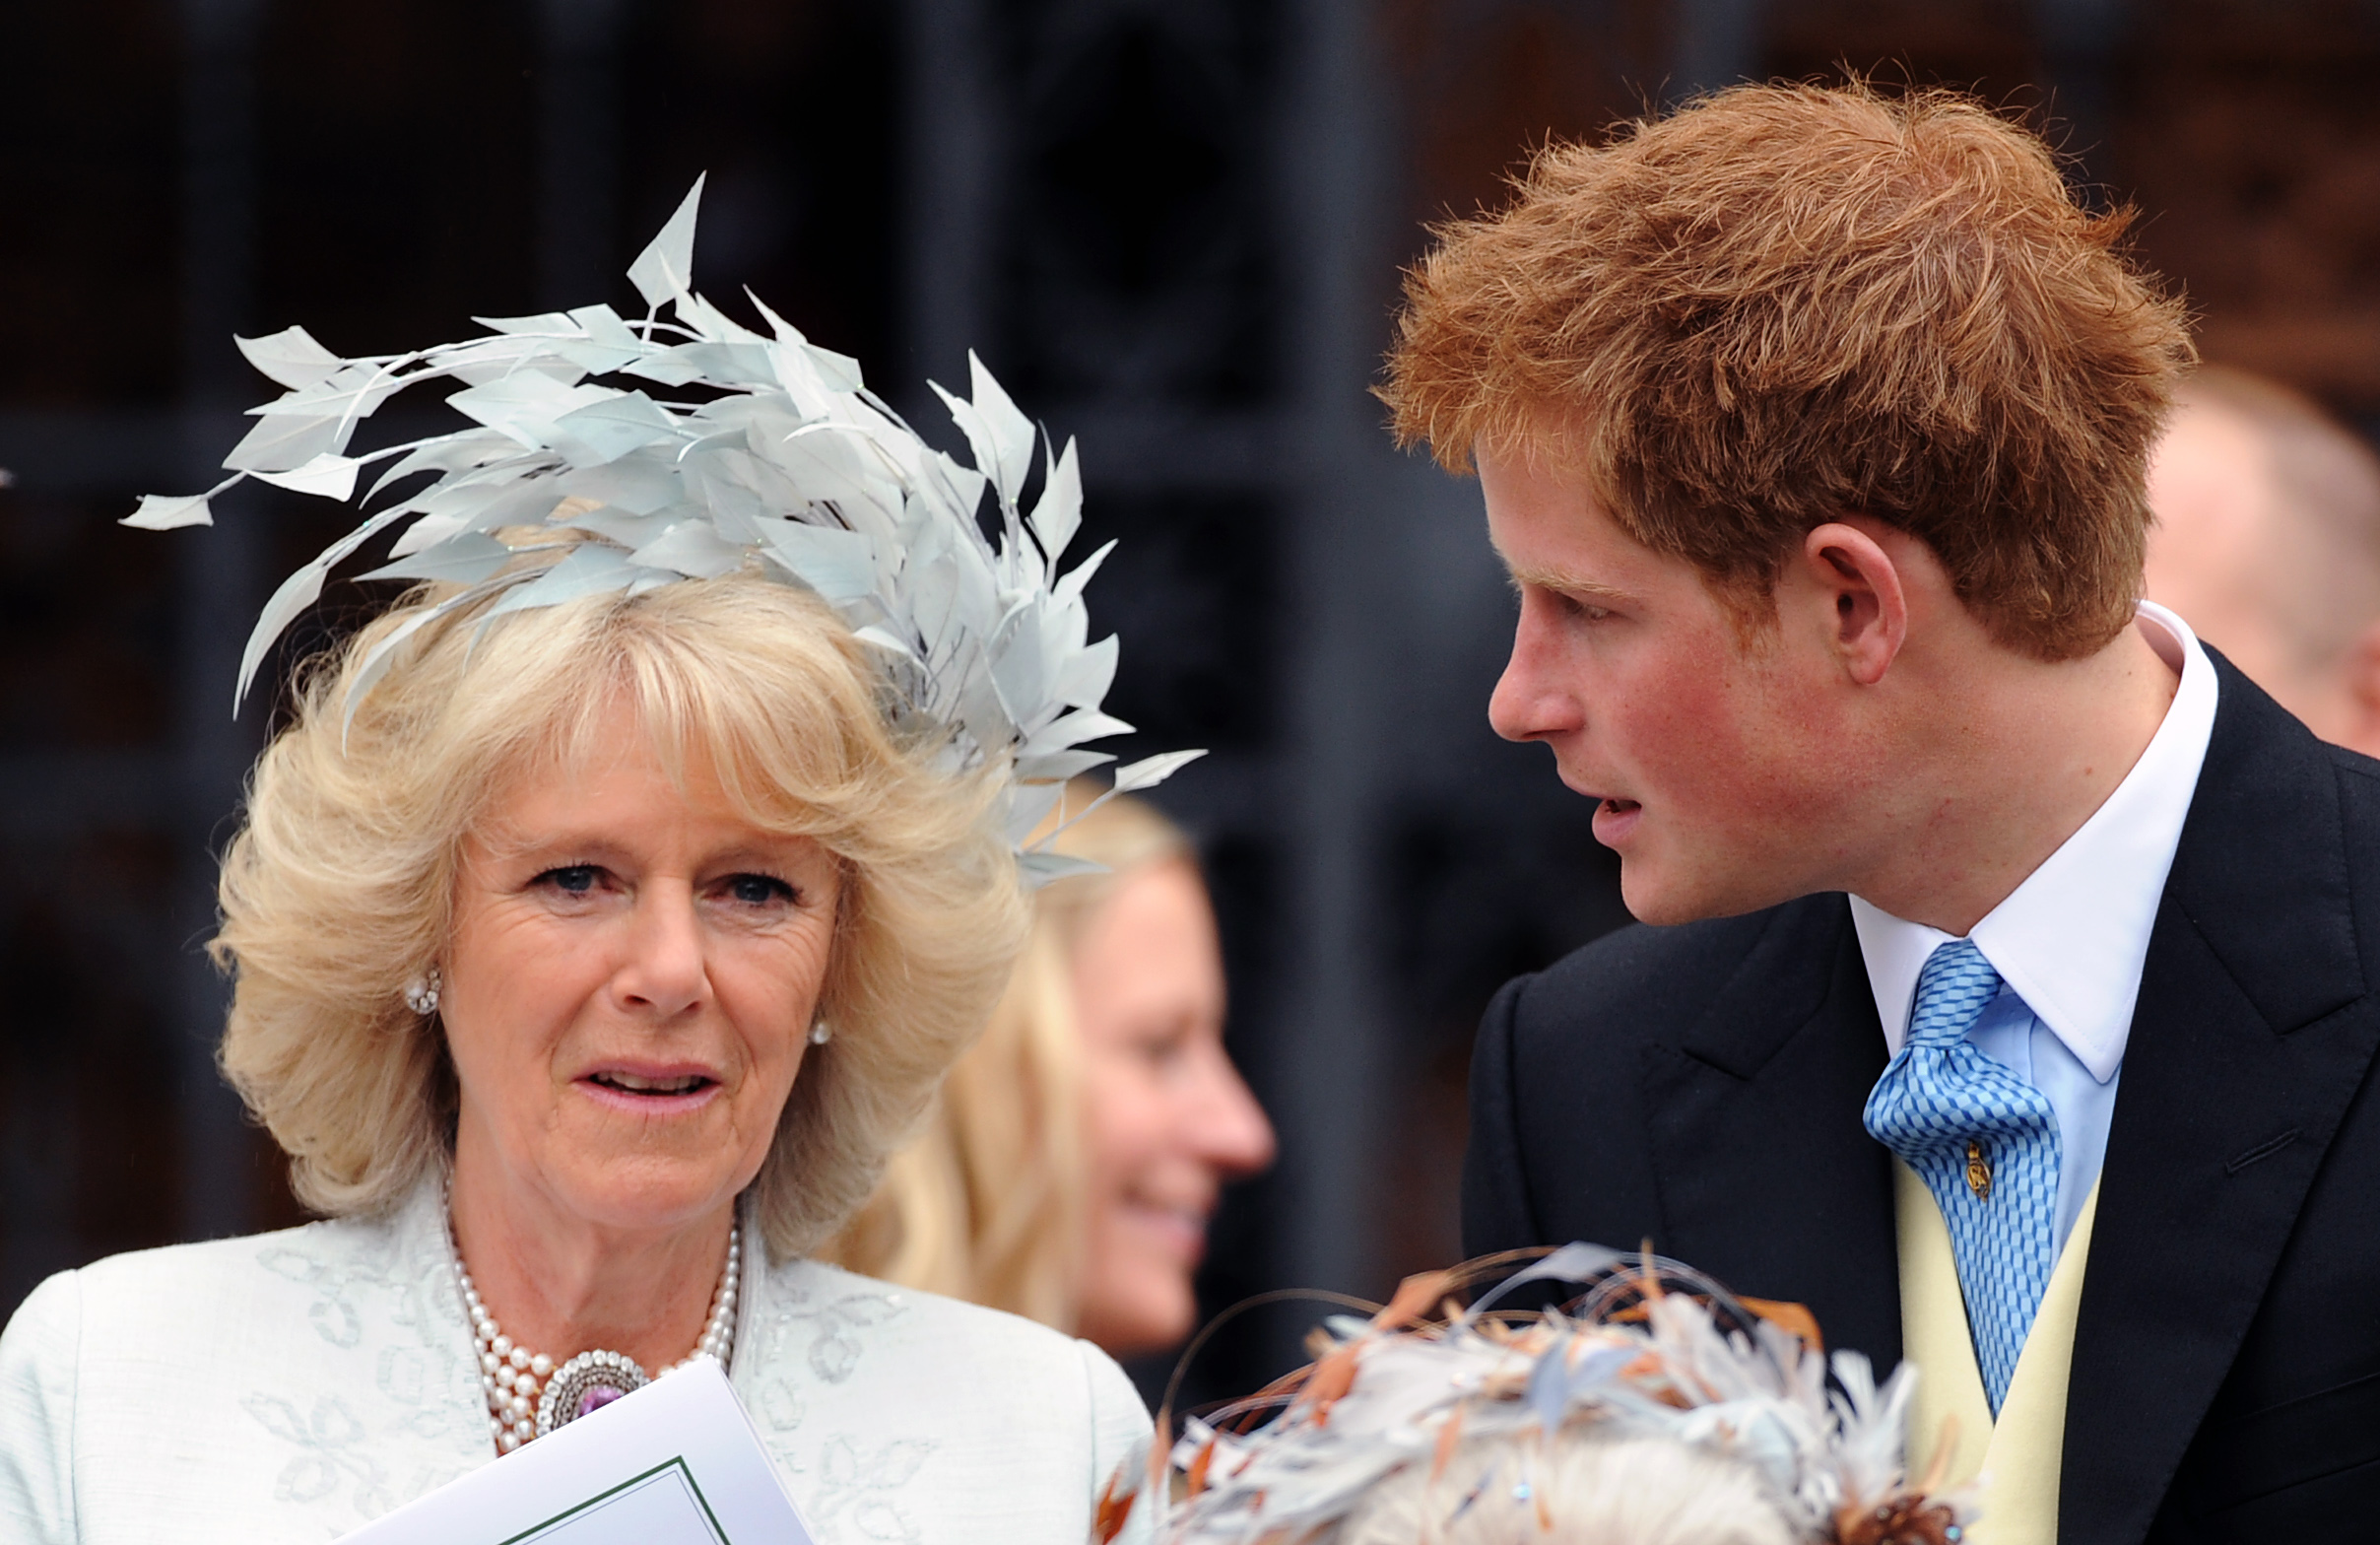 Queen Camilla and Prince Harry at the wedding of Peter Phillips and Autumn Kelly in Windsor, England on May 17, 2008 | Source: Getty Images